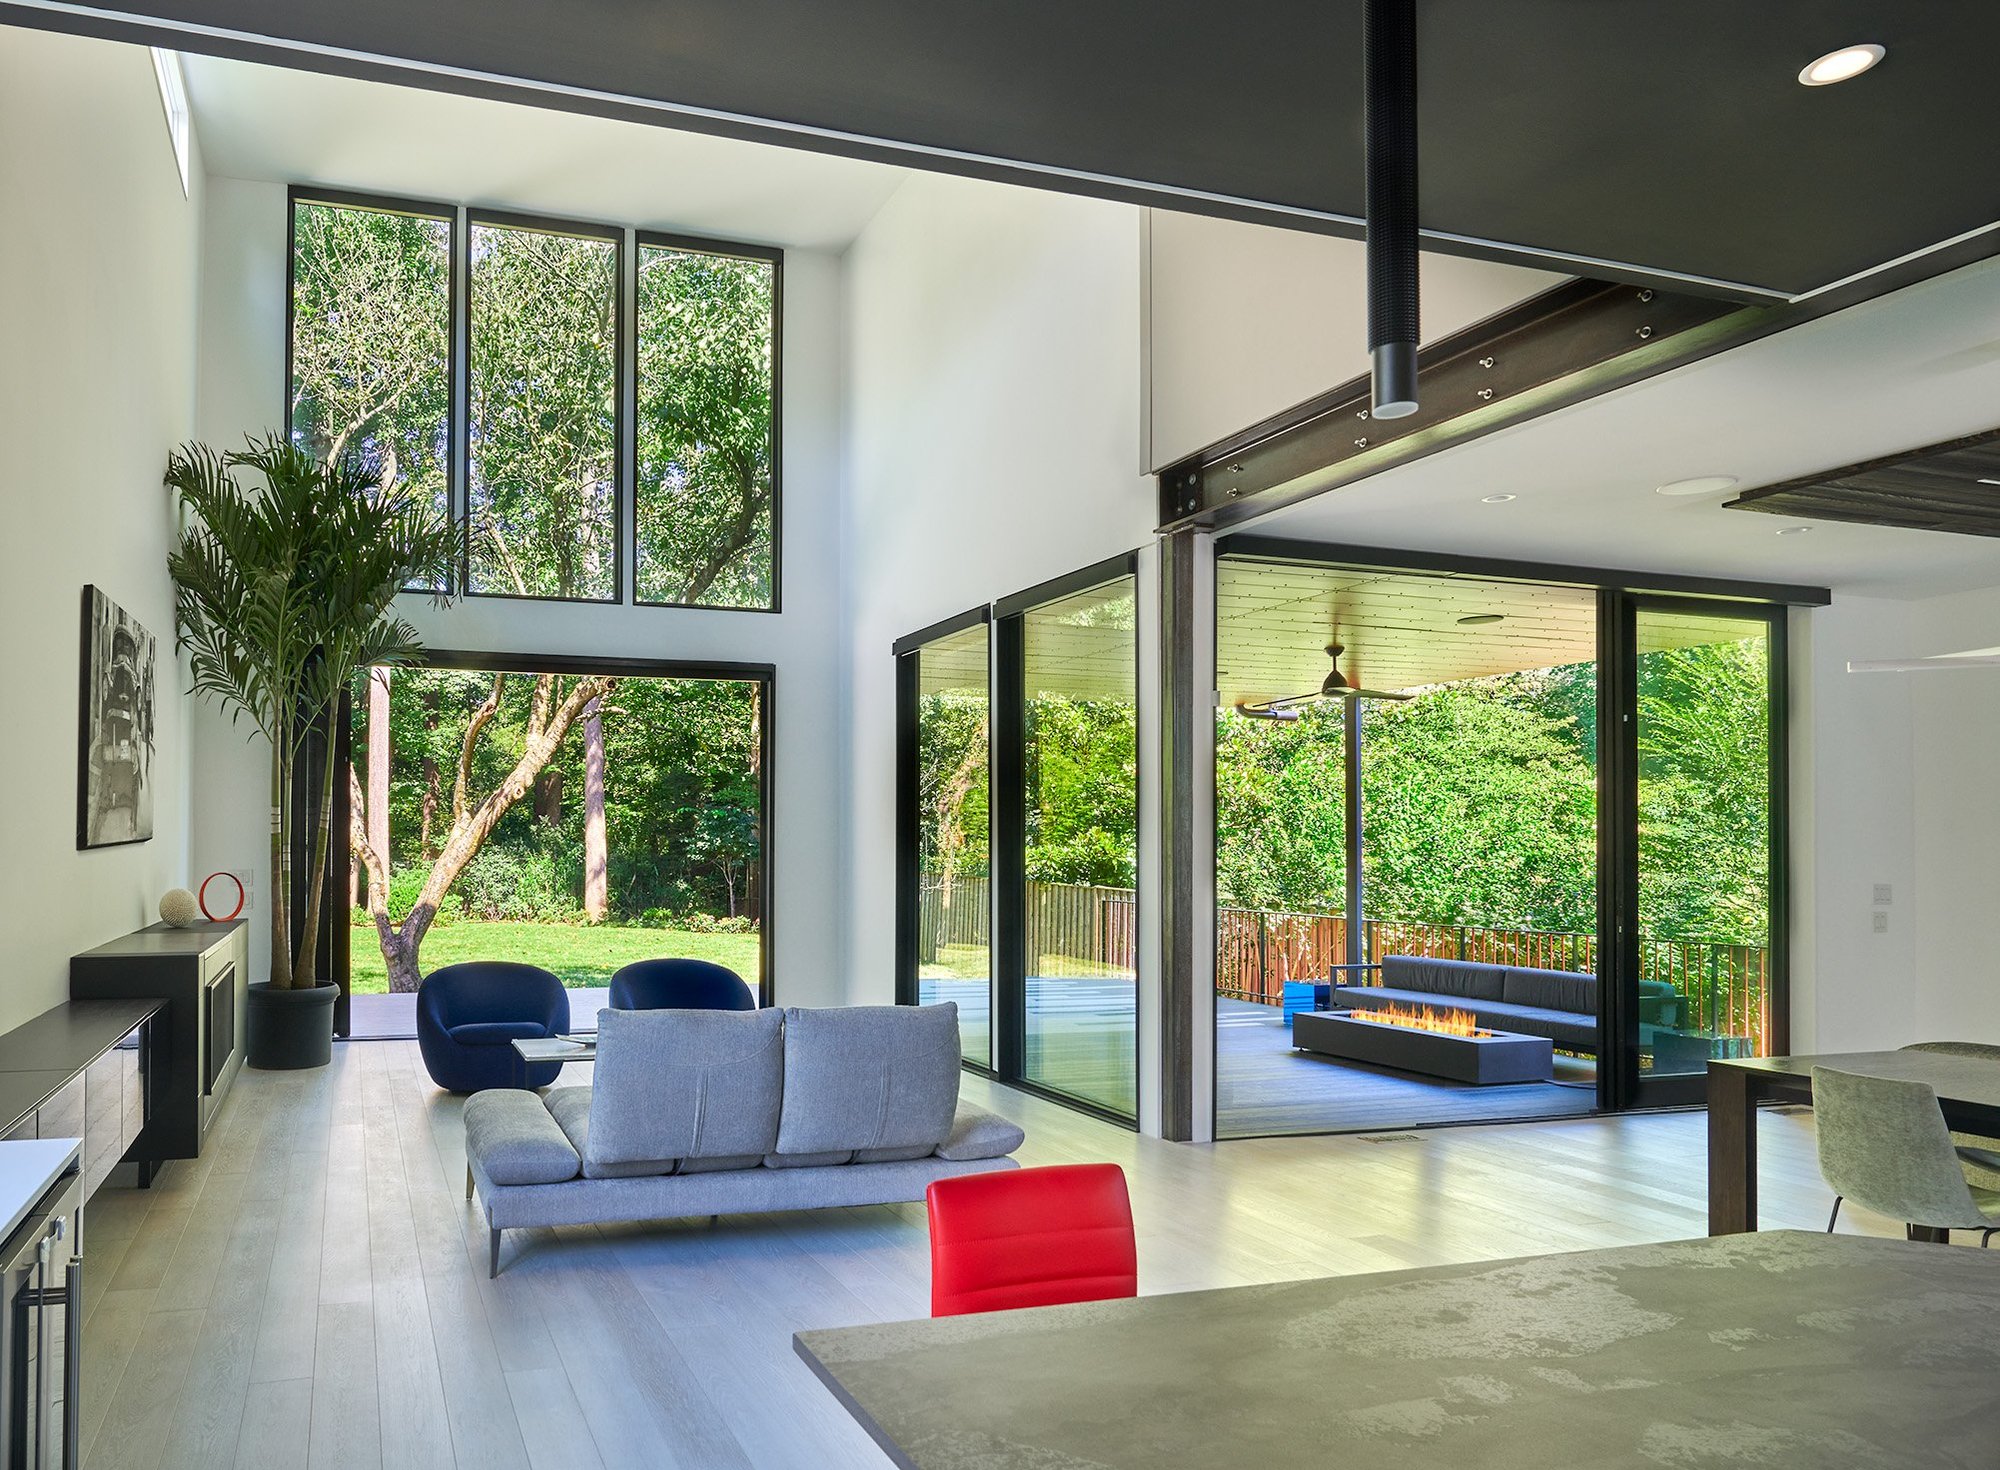 Looking out the back of a modern home that has expansive windows, large open doors and a deck.